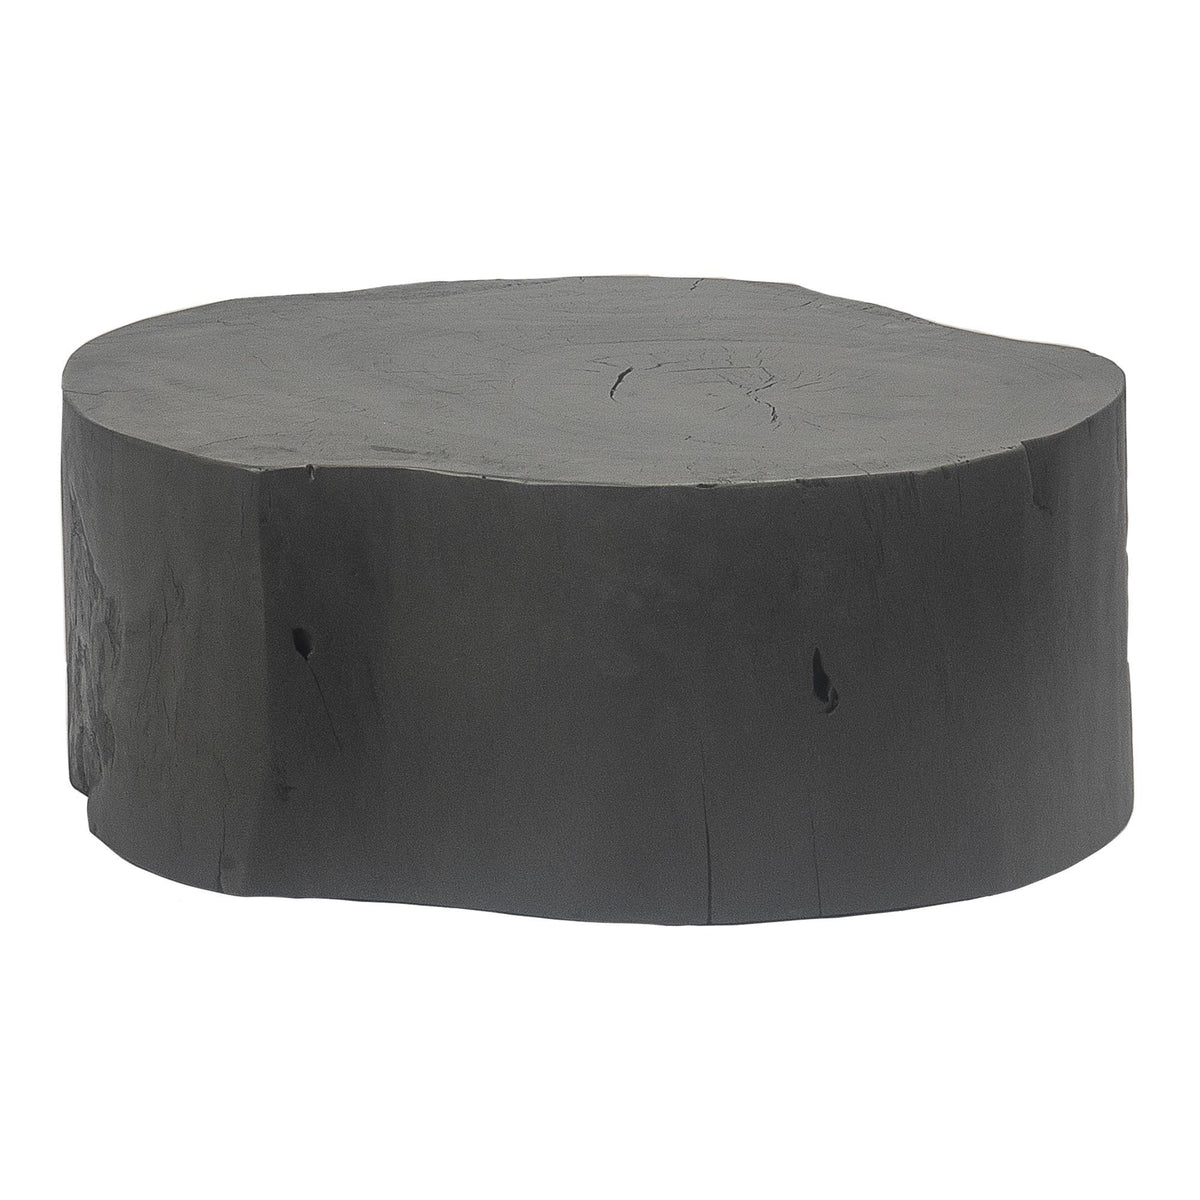 Moe's Home Collection Dendra Coffee Table Black - EI-1070-02